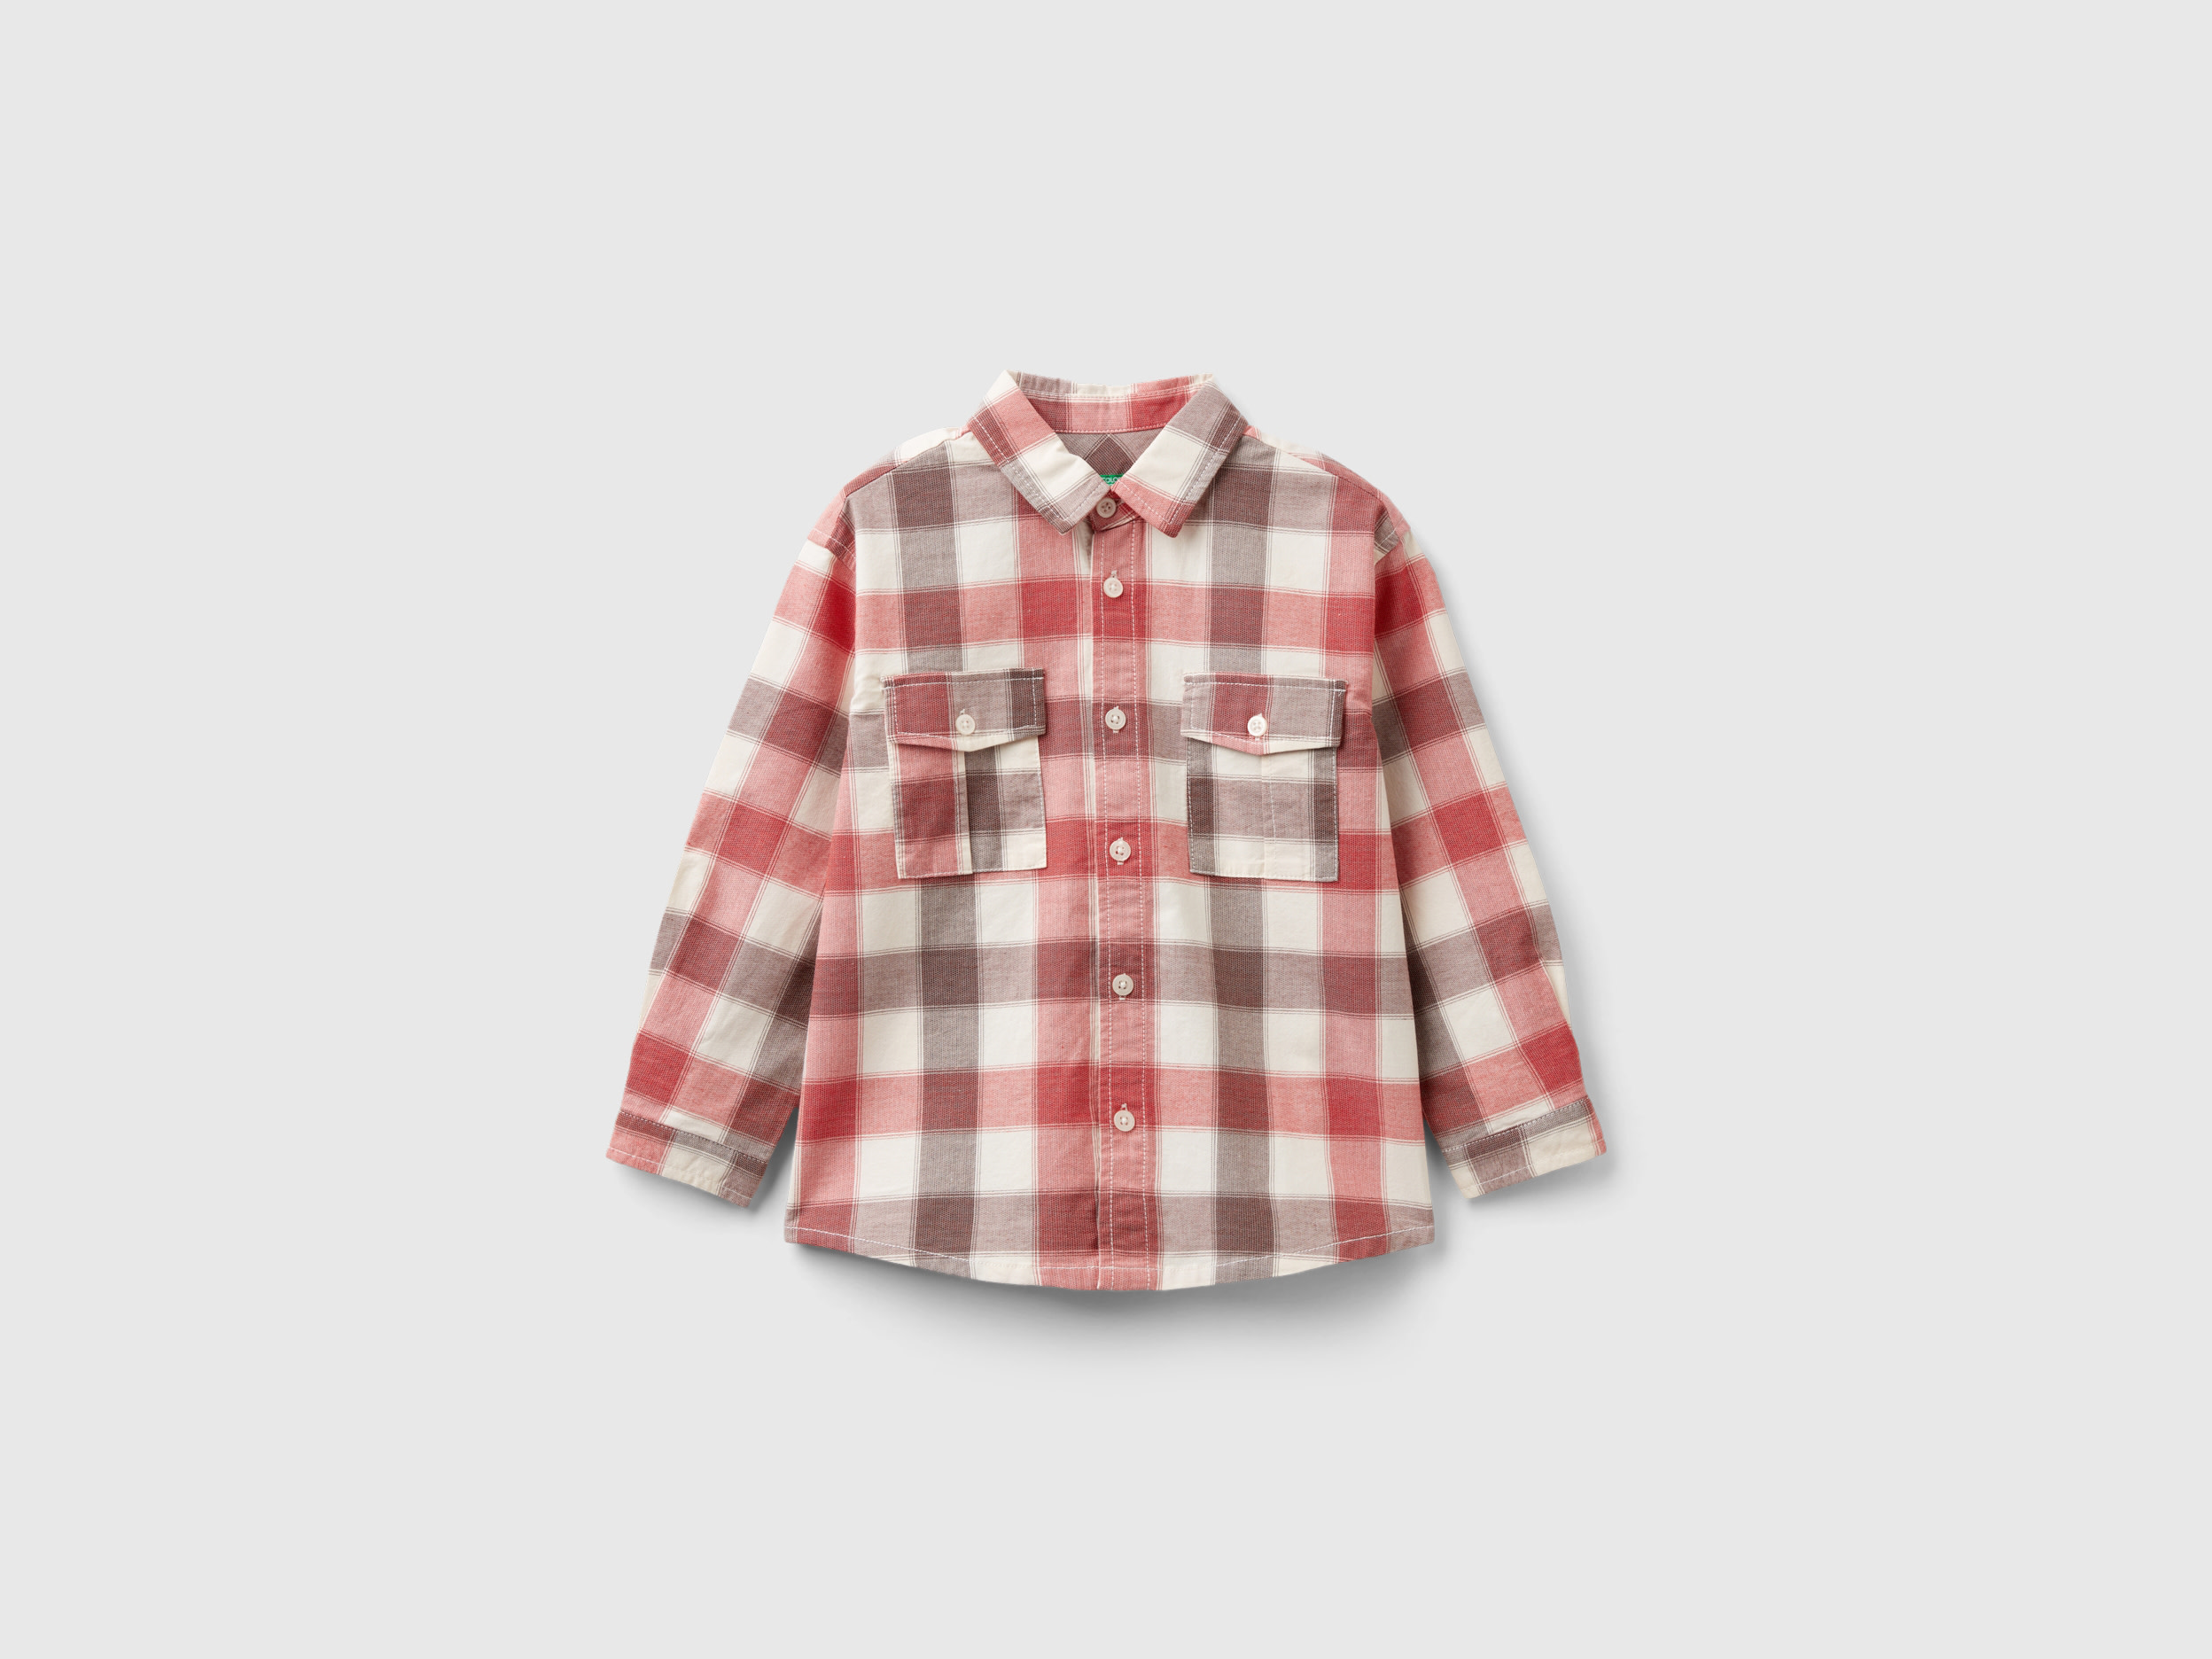 Benetton, Check Shirt In Stretch Cotton, size 2-3, Multi-color, Kids